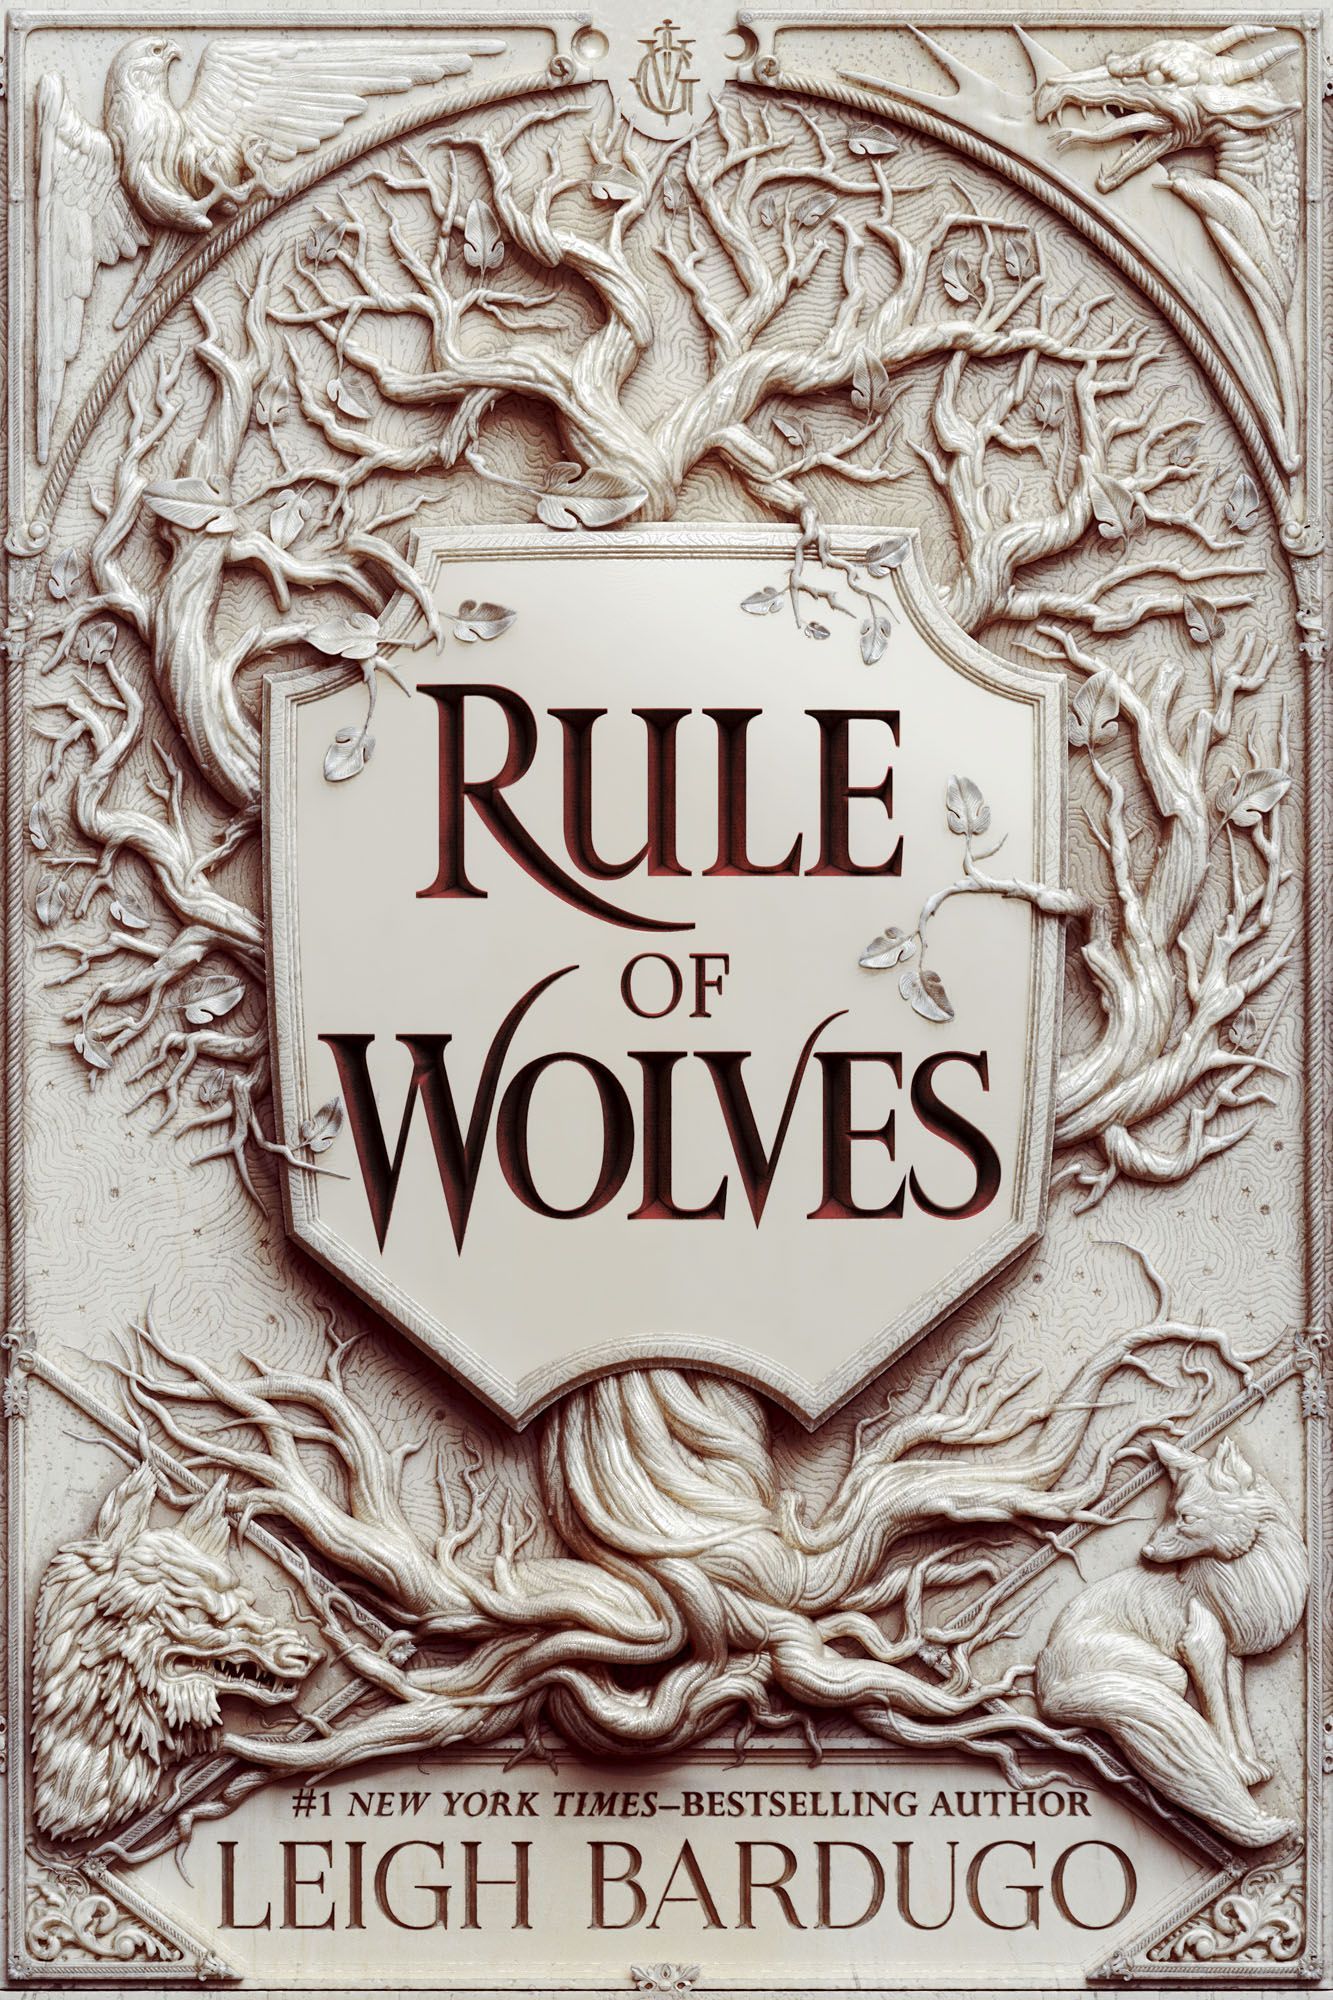 "Rule of Wolves"